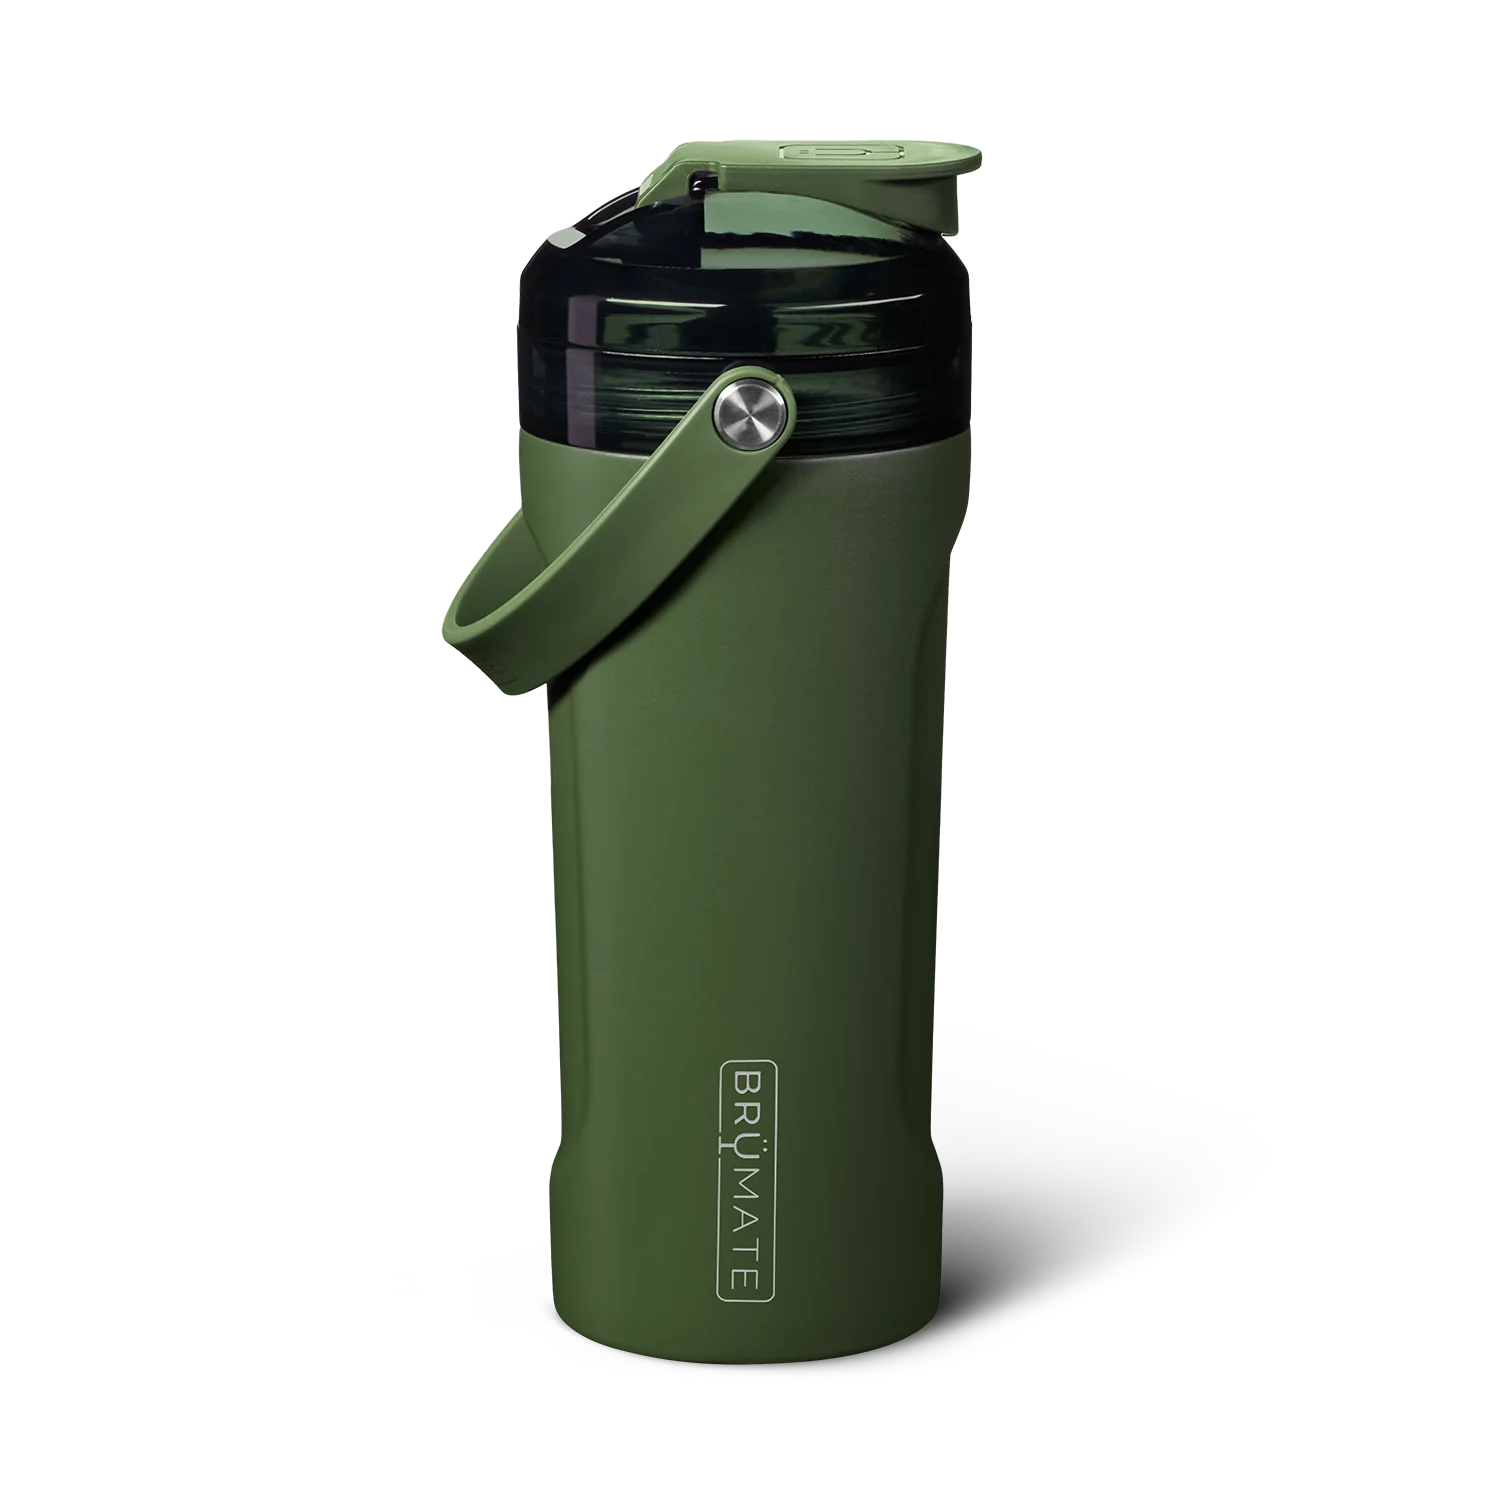 The MultiShaker is made for elevating your fitness journey. Our built-in patent-pending agitator blends your shakes, greens, and powders without any clumps, while also serving as a water infuser for herbs and fruits. It includes our BevGuard™ insulation to keep ice for 24+ hours, a spill-proof MagFlip™ lid, volume markings on the inside, a durable silicone handle, a non-slip base, and the ability to interchange tops with our MÜV or Straw Lids, making it perfect for any workout or adventure.(Od Green)